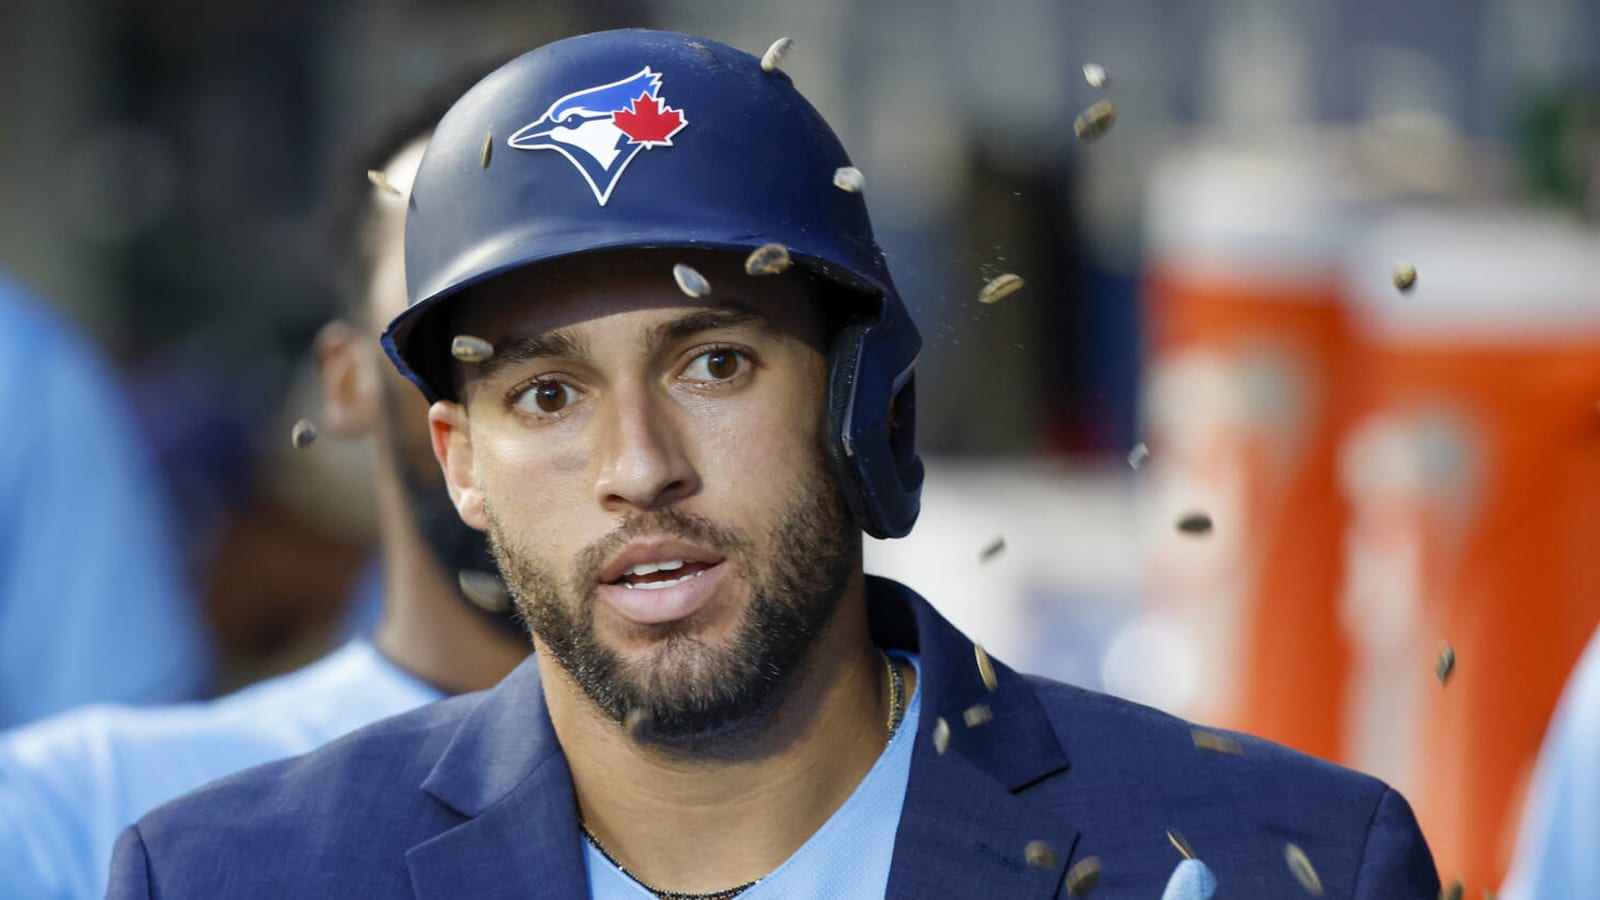 Polished George Springer shows his class before ever donning a Jays jersey  - The Globe and Mail